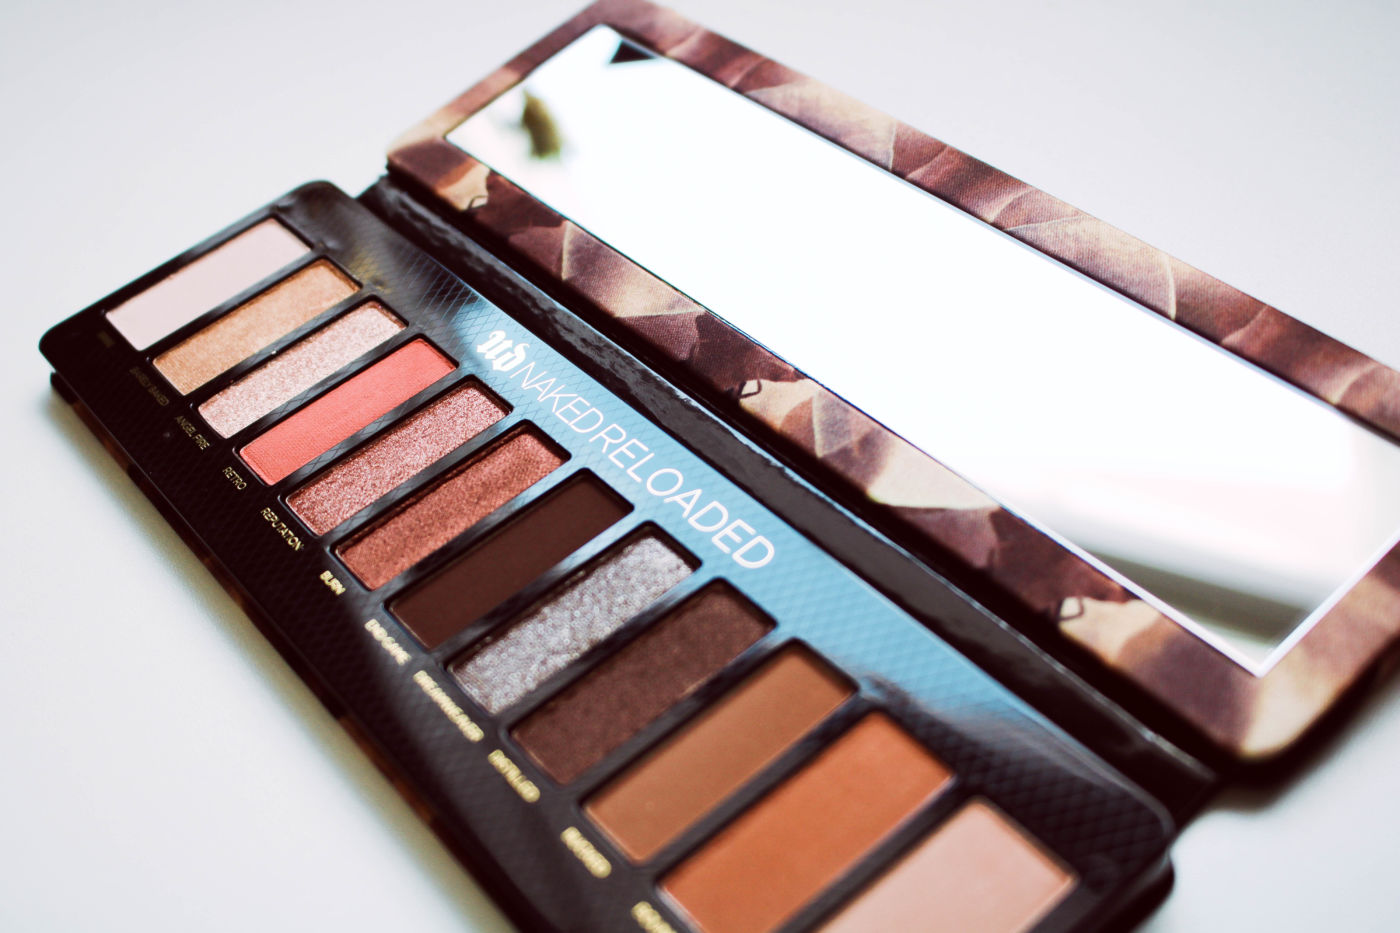 Urban Decay Naked Reloaded Eyeshadow Palette Review - The 